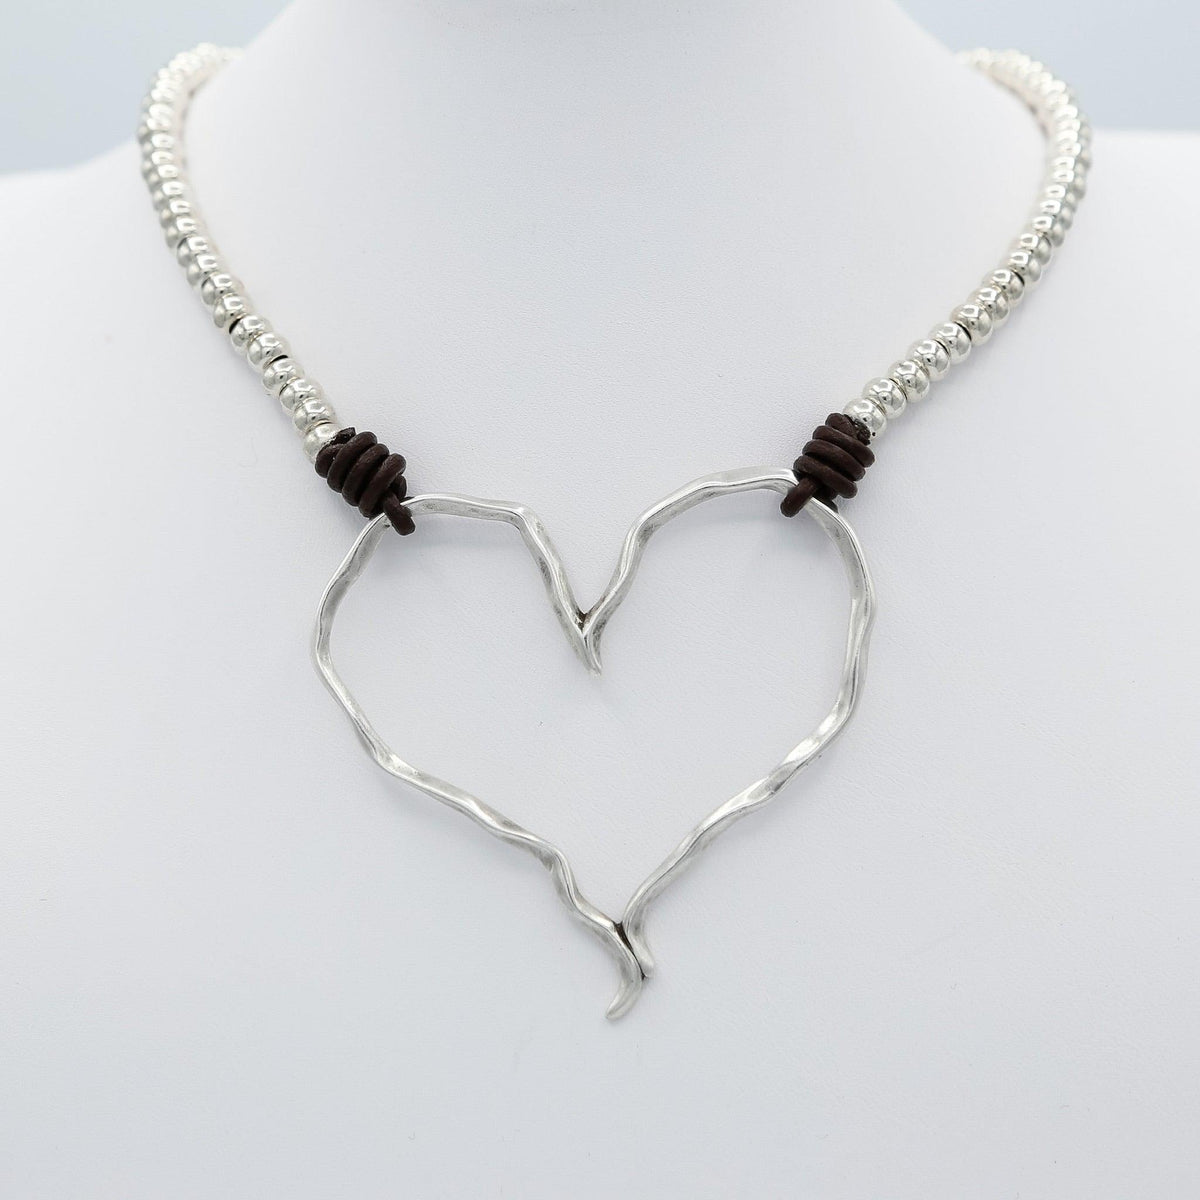 Silver Heart Short Leather Necklace - Vita Isola